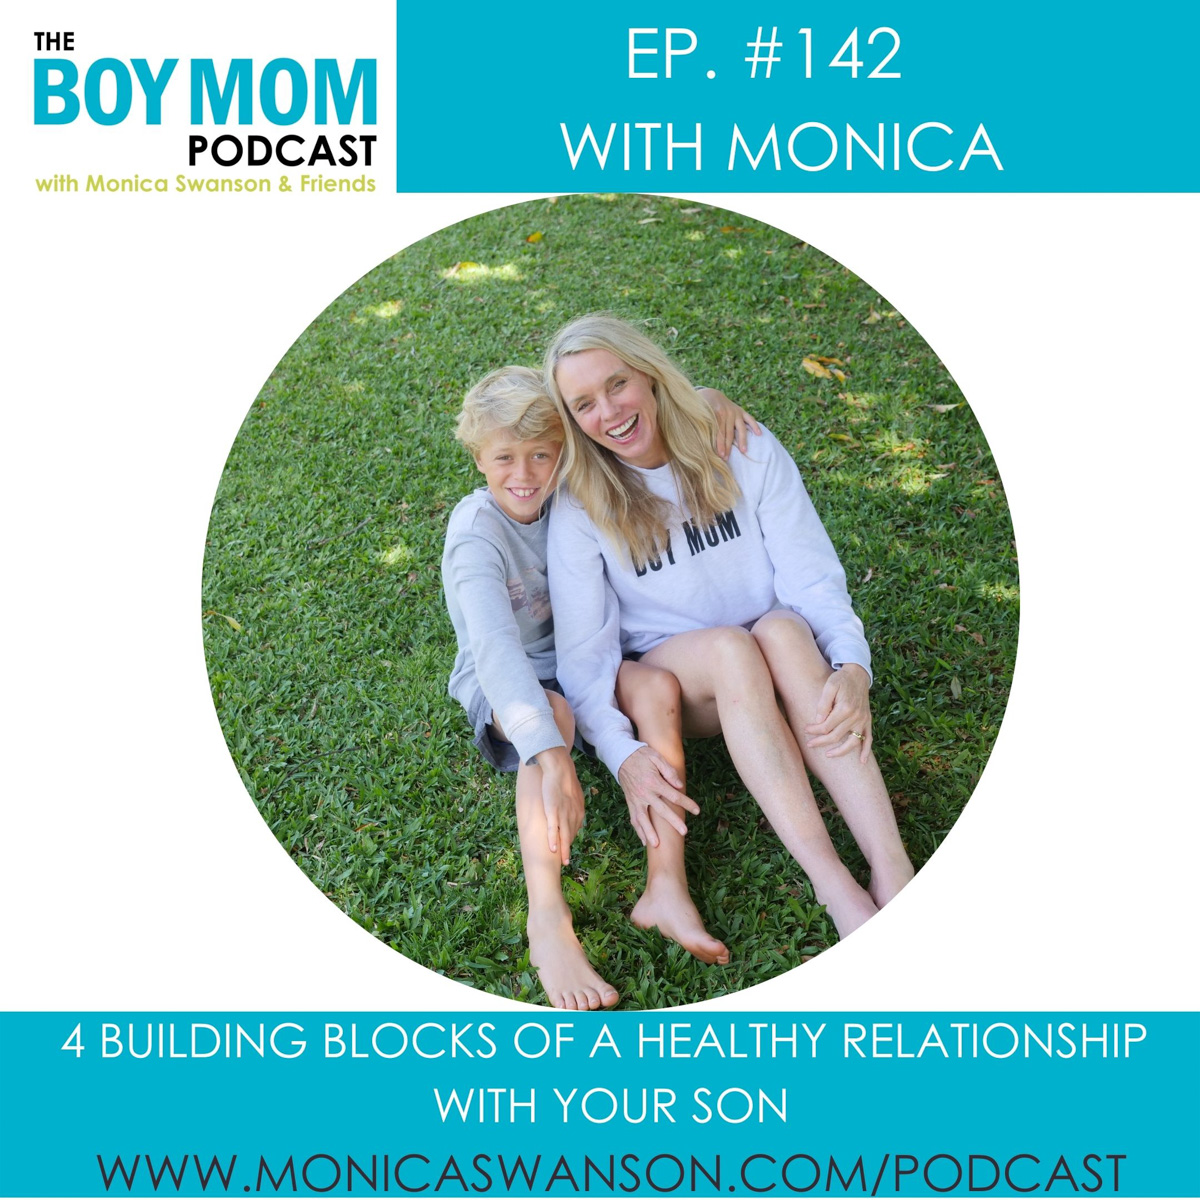 4 Building Blocks of a Healthy Relationship with Your Son